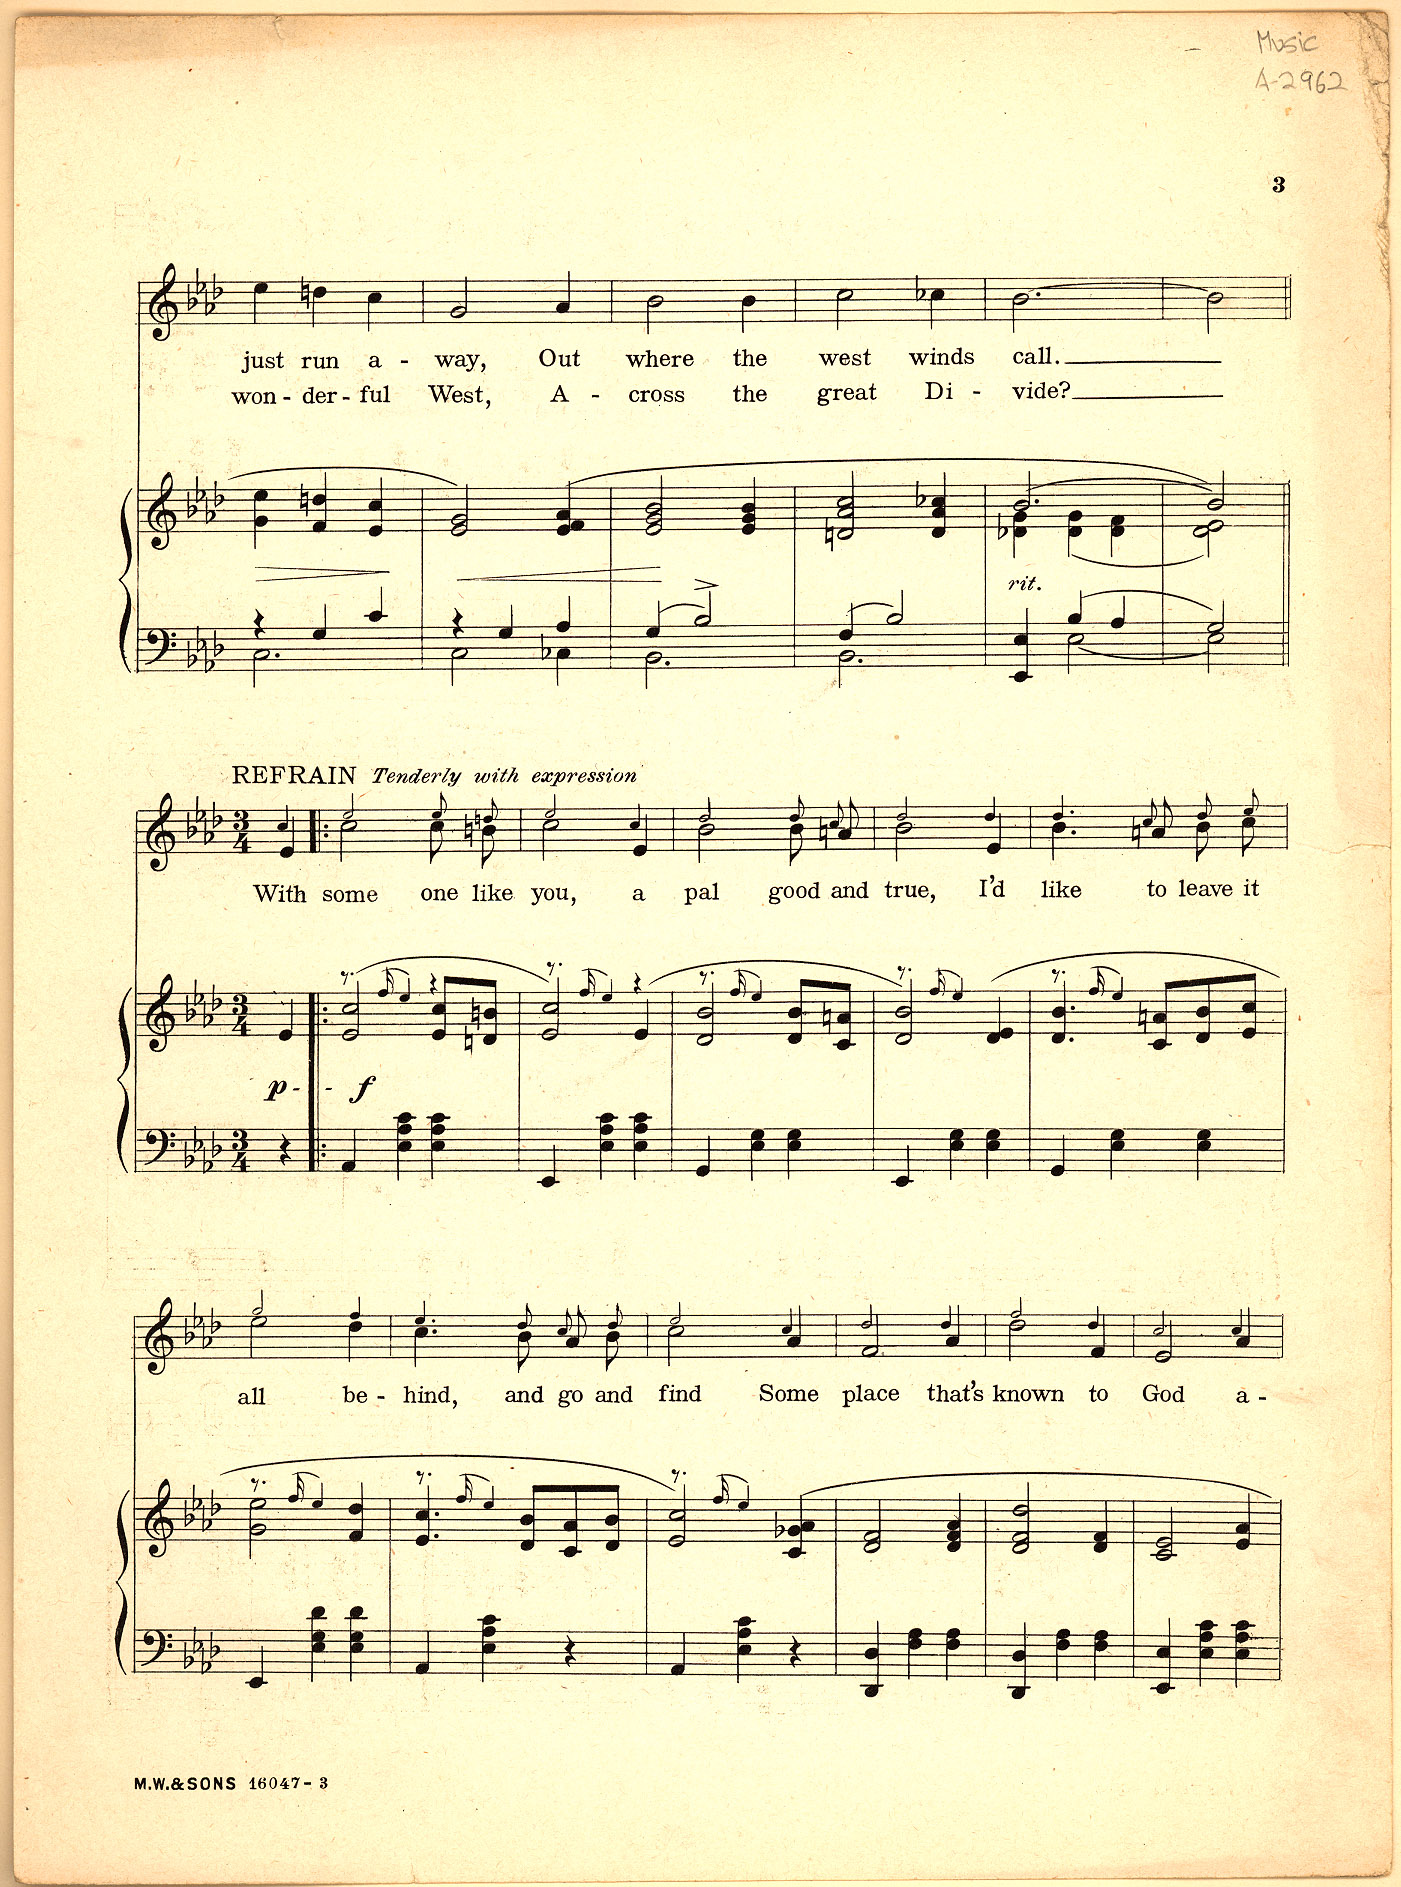 Let the rest of the world go by [Historic American Sheet Music]